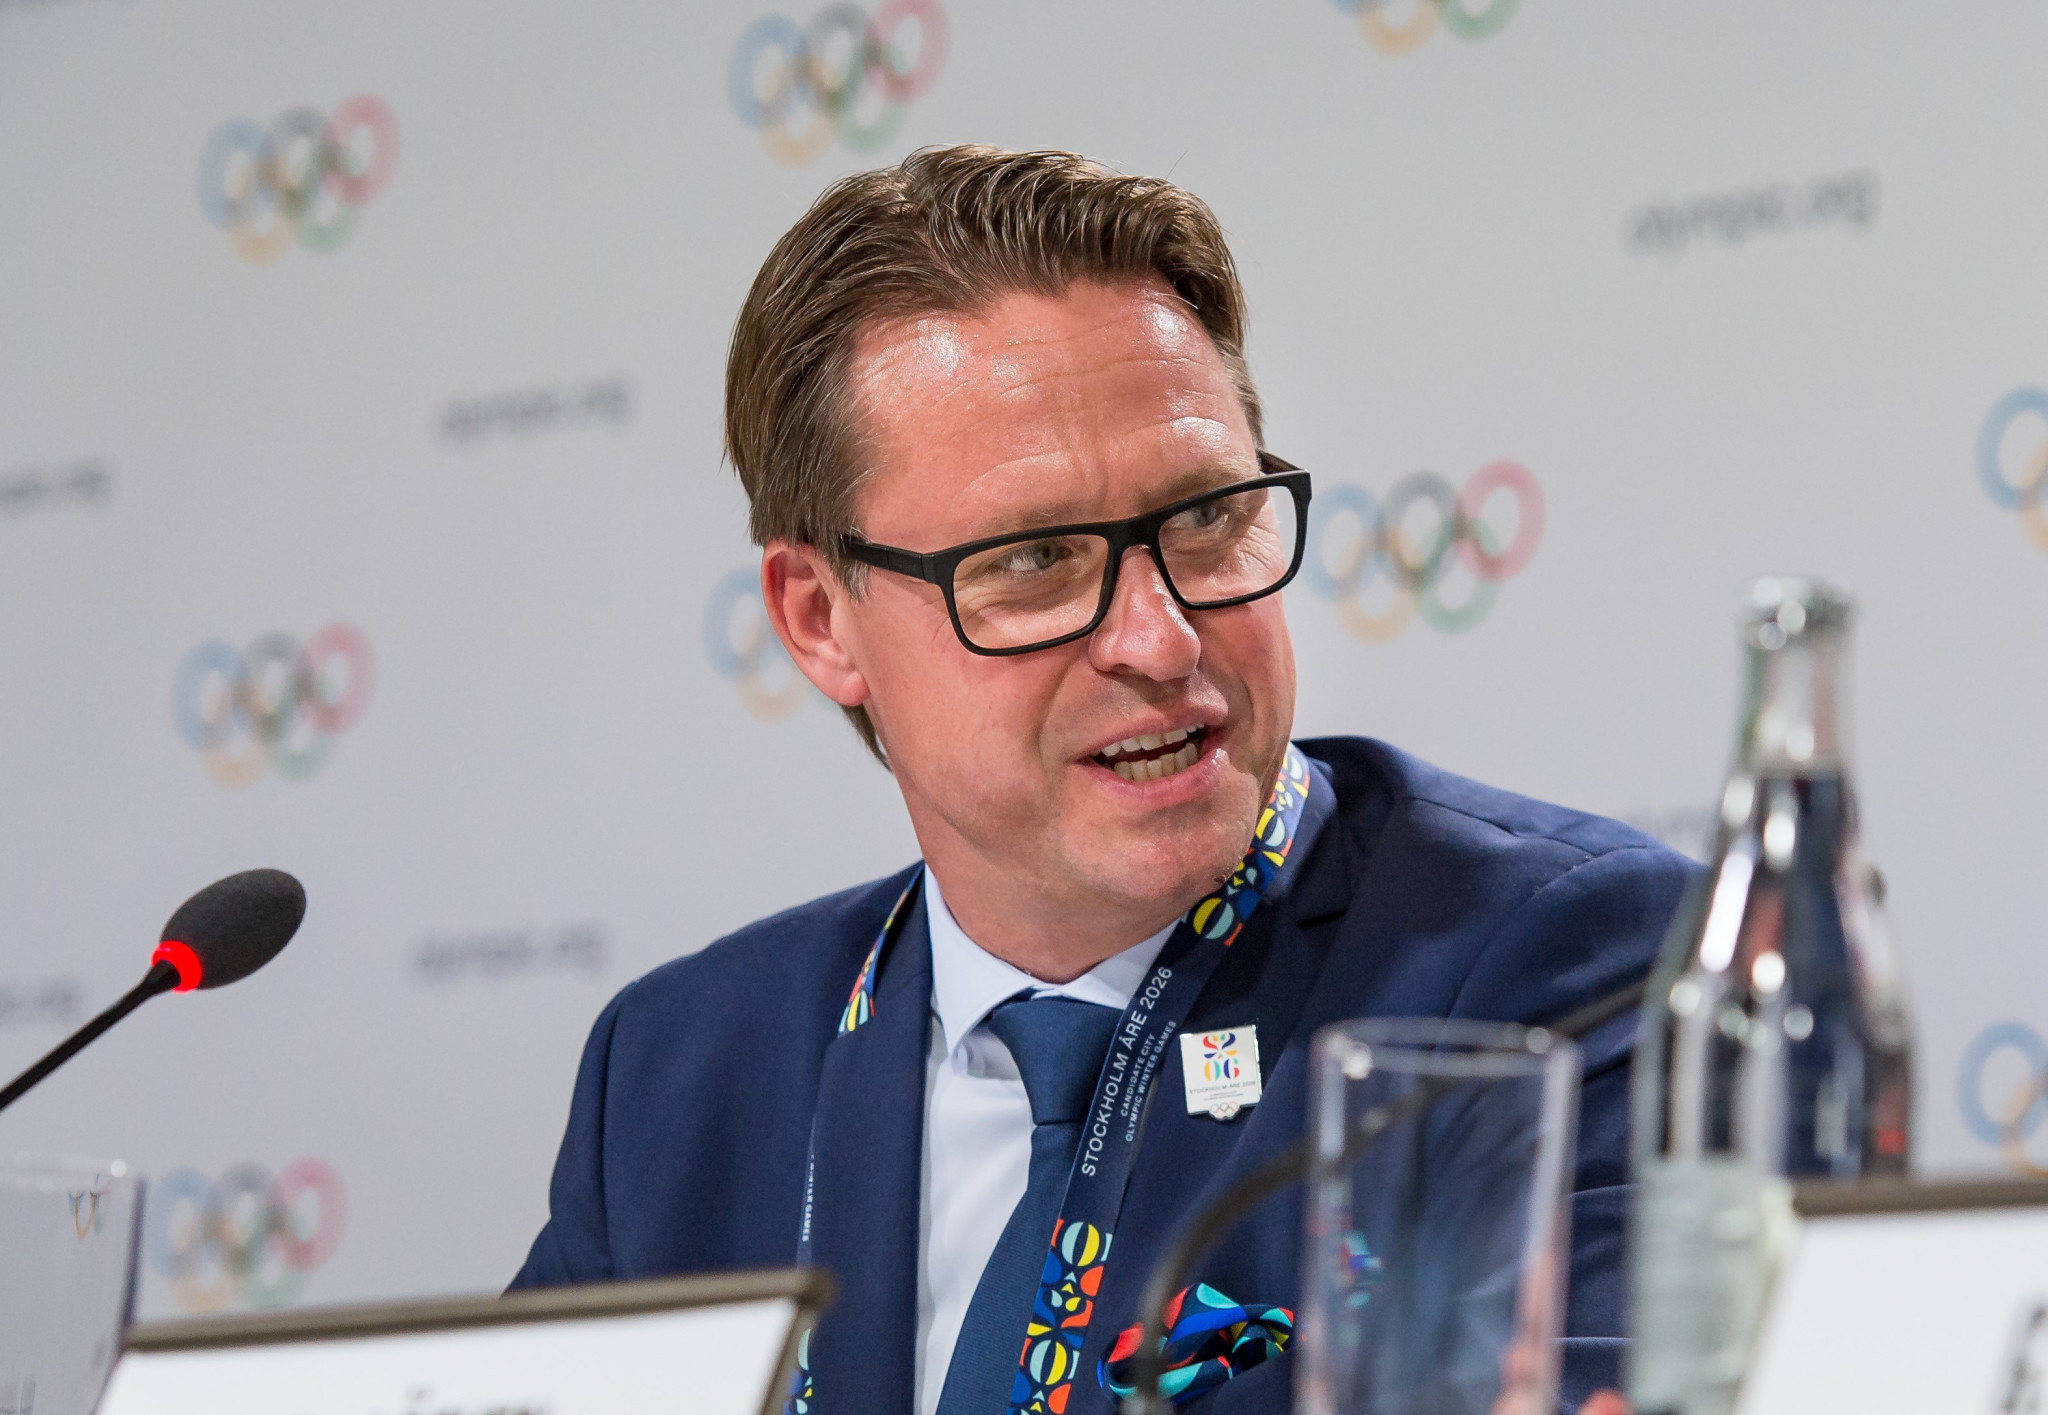 Swedish Olympic Committee President Mats Årjes has ruled out a boycott of the Beijing 2022 Winter Olympics ©Getty Images